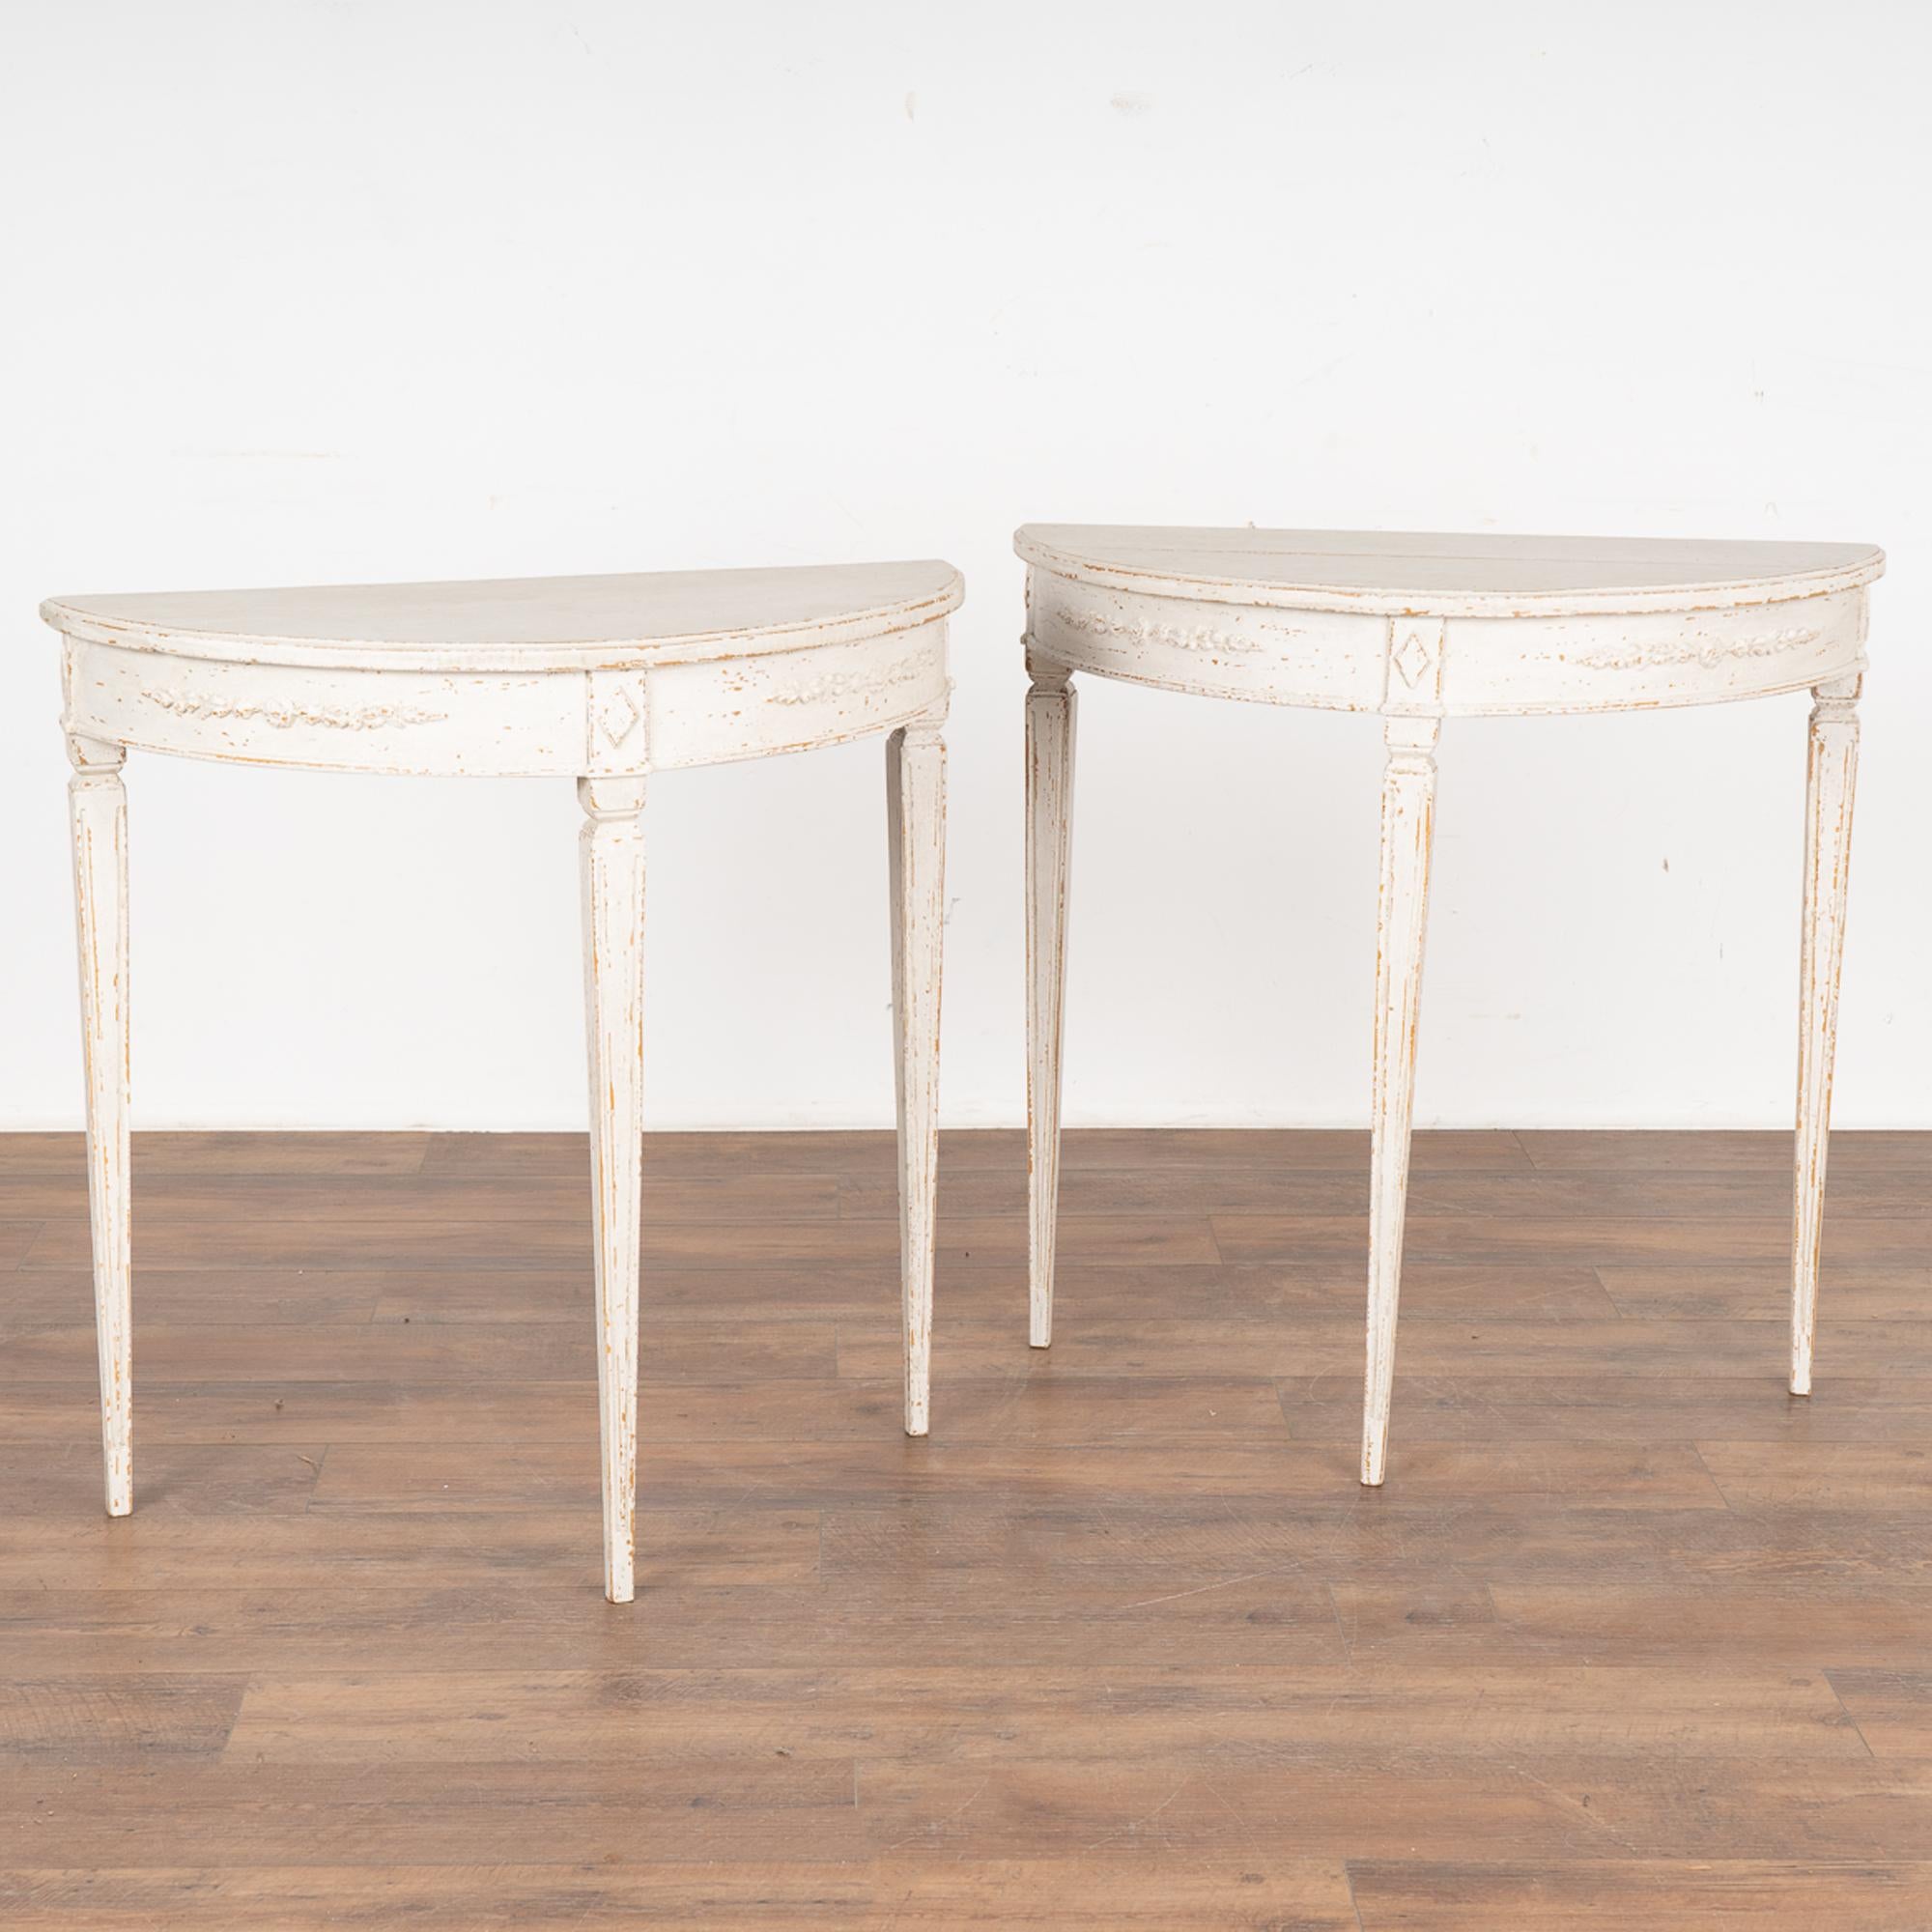 Pair, Gustavian Style demilune side tables or consoles. 
Gently tapered long fluted legs topped by diamond medallion with decorative applied carving along skirt.
Newer professionally applied layered white painted finish, slightly distressed to fit